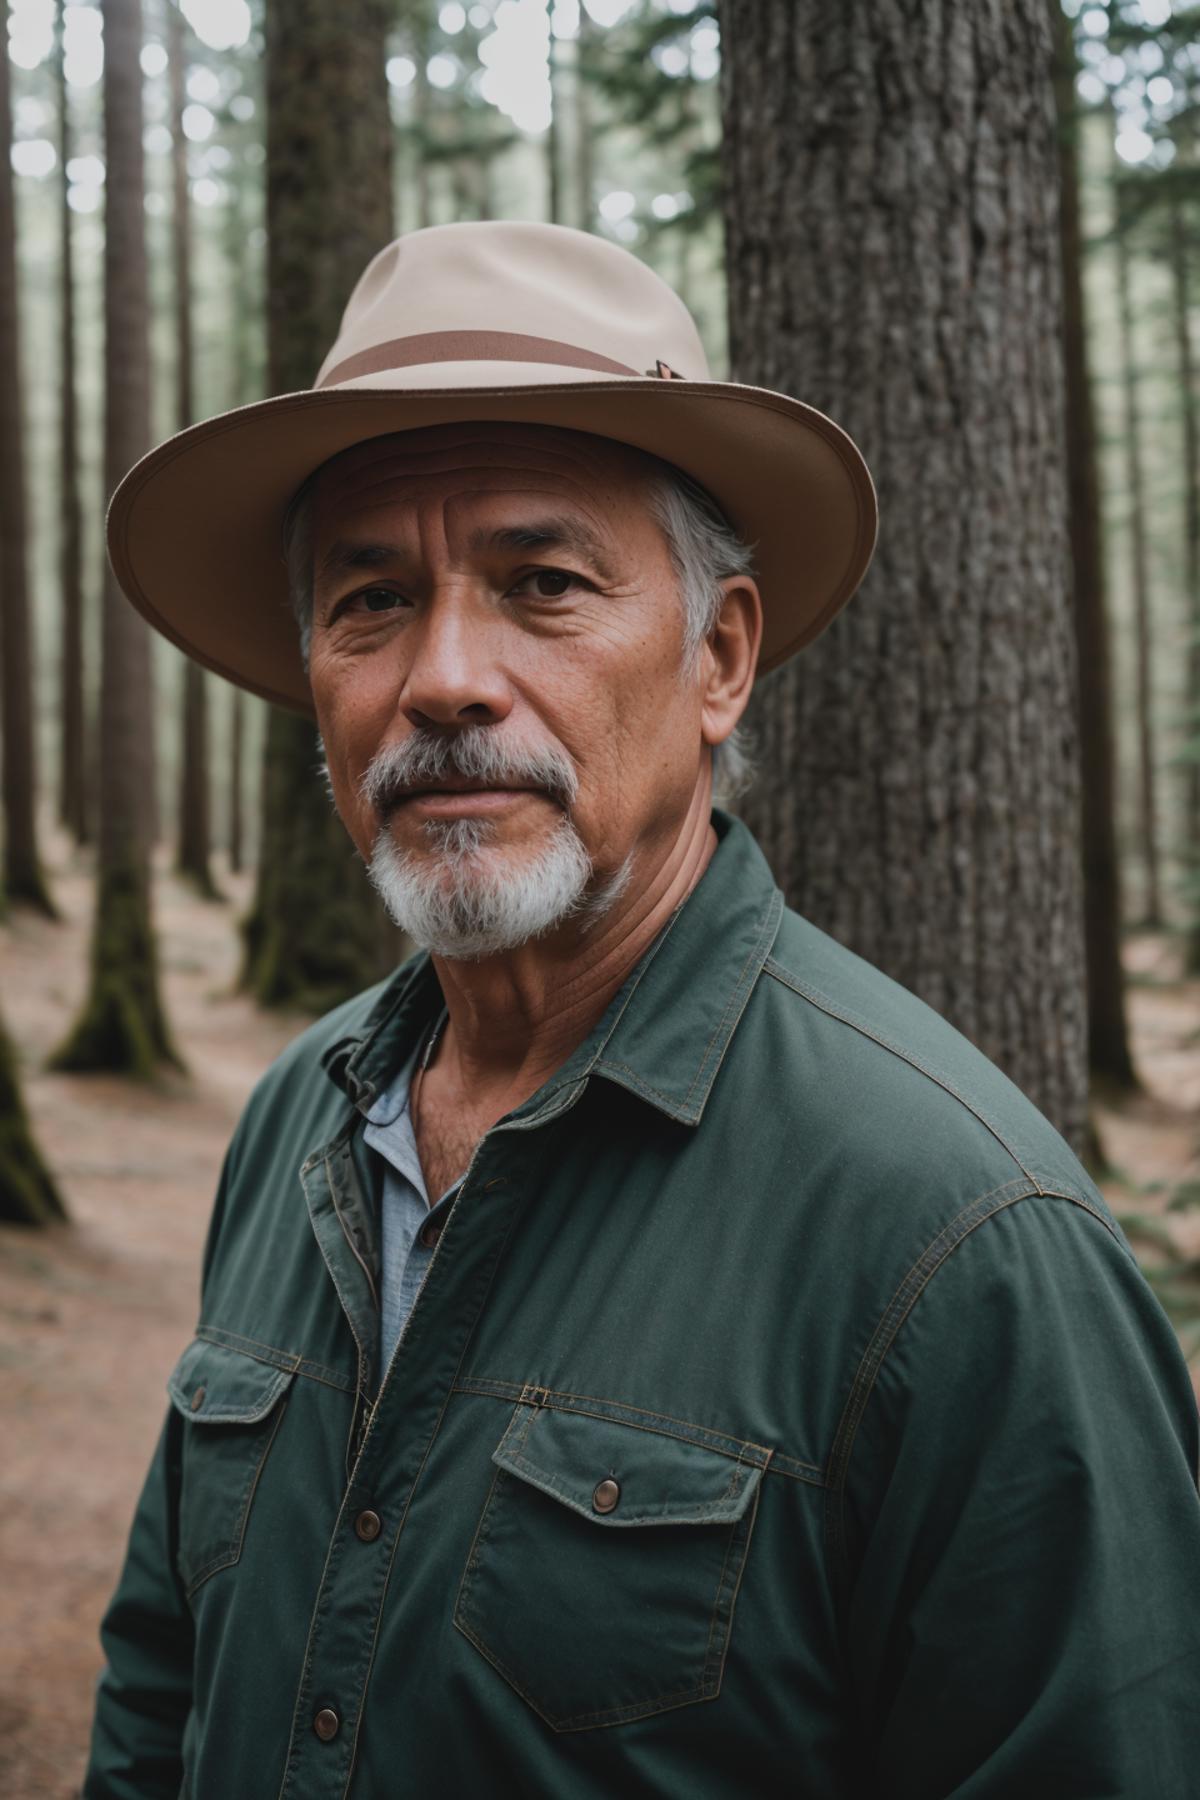 An older man wearing a hat and green jacket stands in a wooded area.